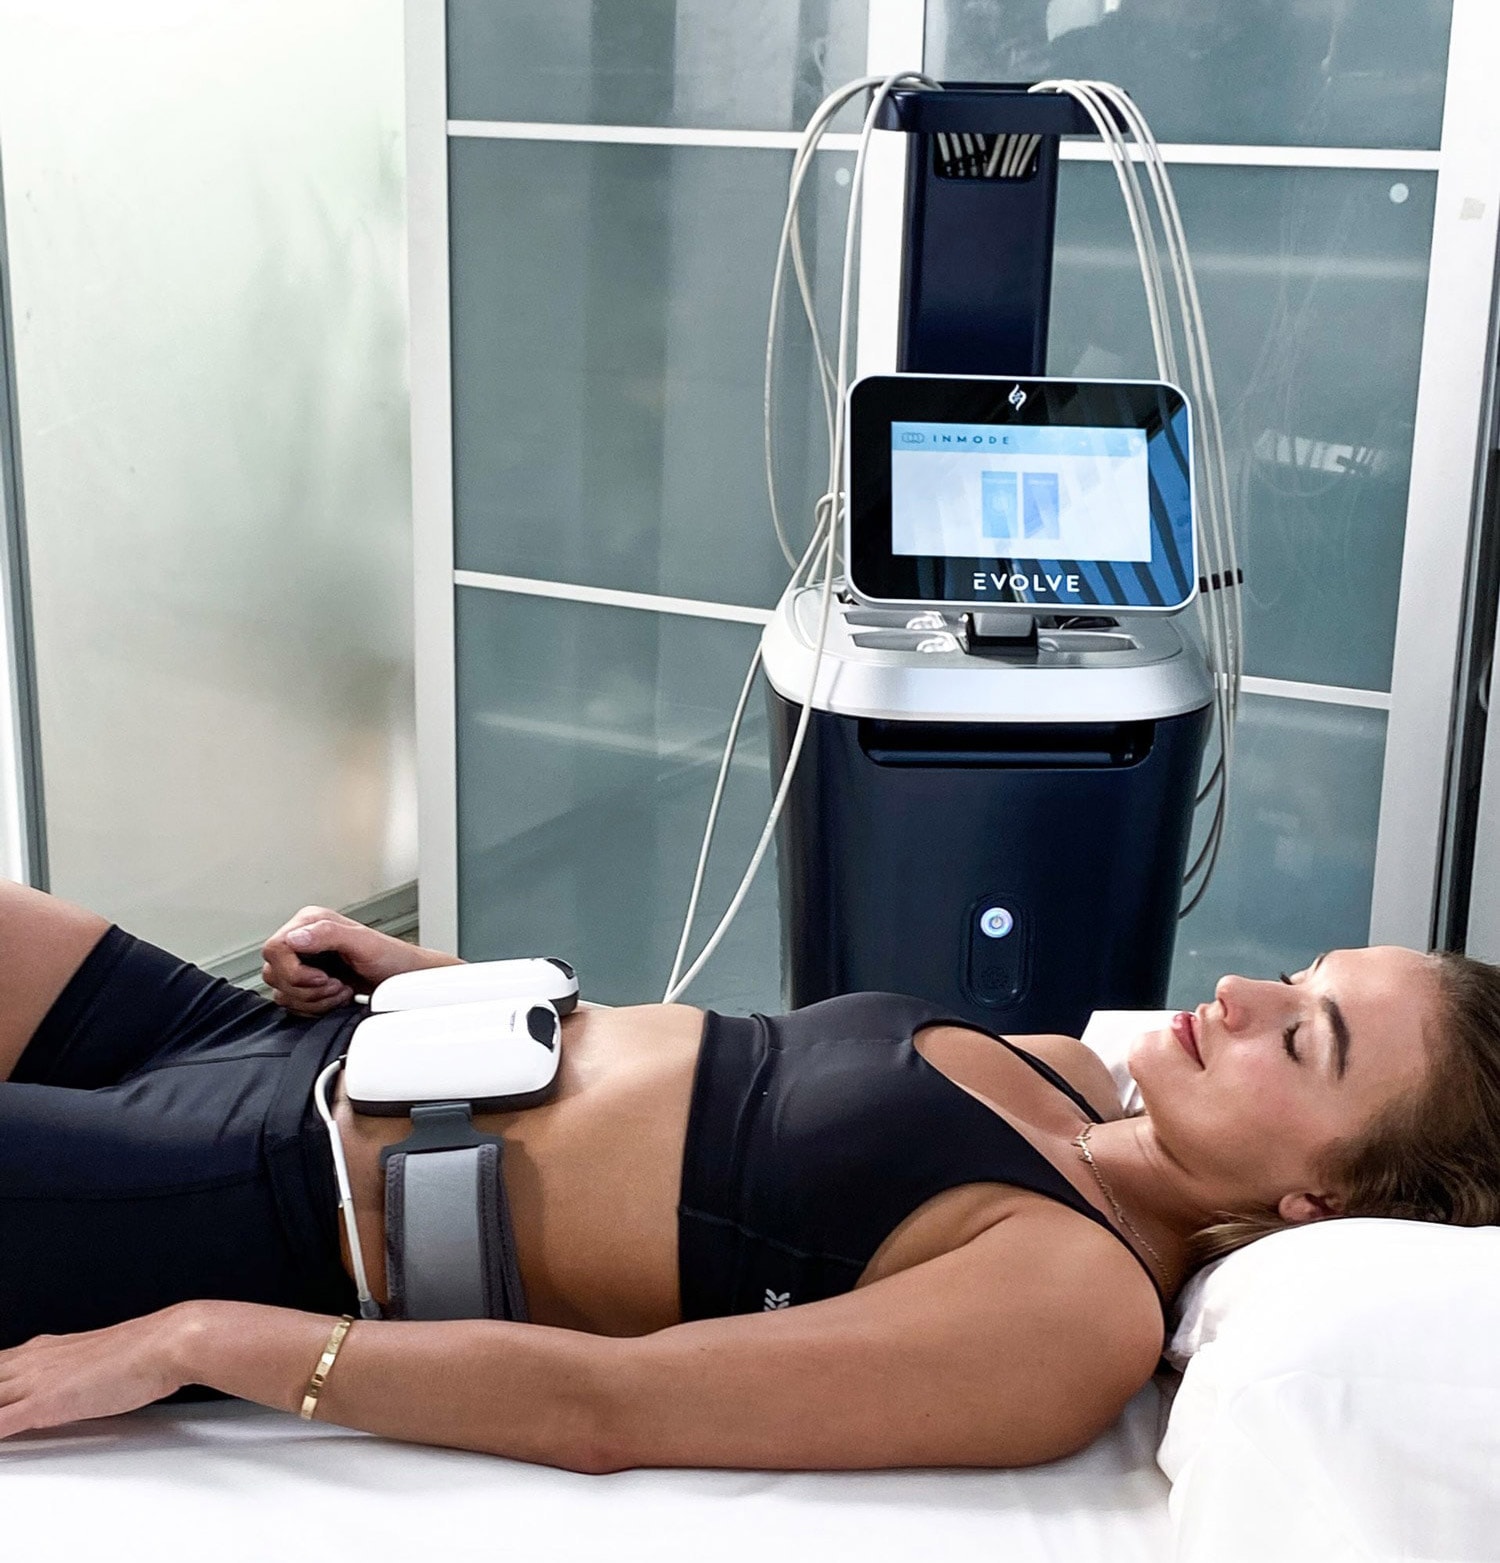 A woman has treatment with the Evolve Tone using EMS or Electro Muscular Stimulation to improve muscle tone in her abs